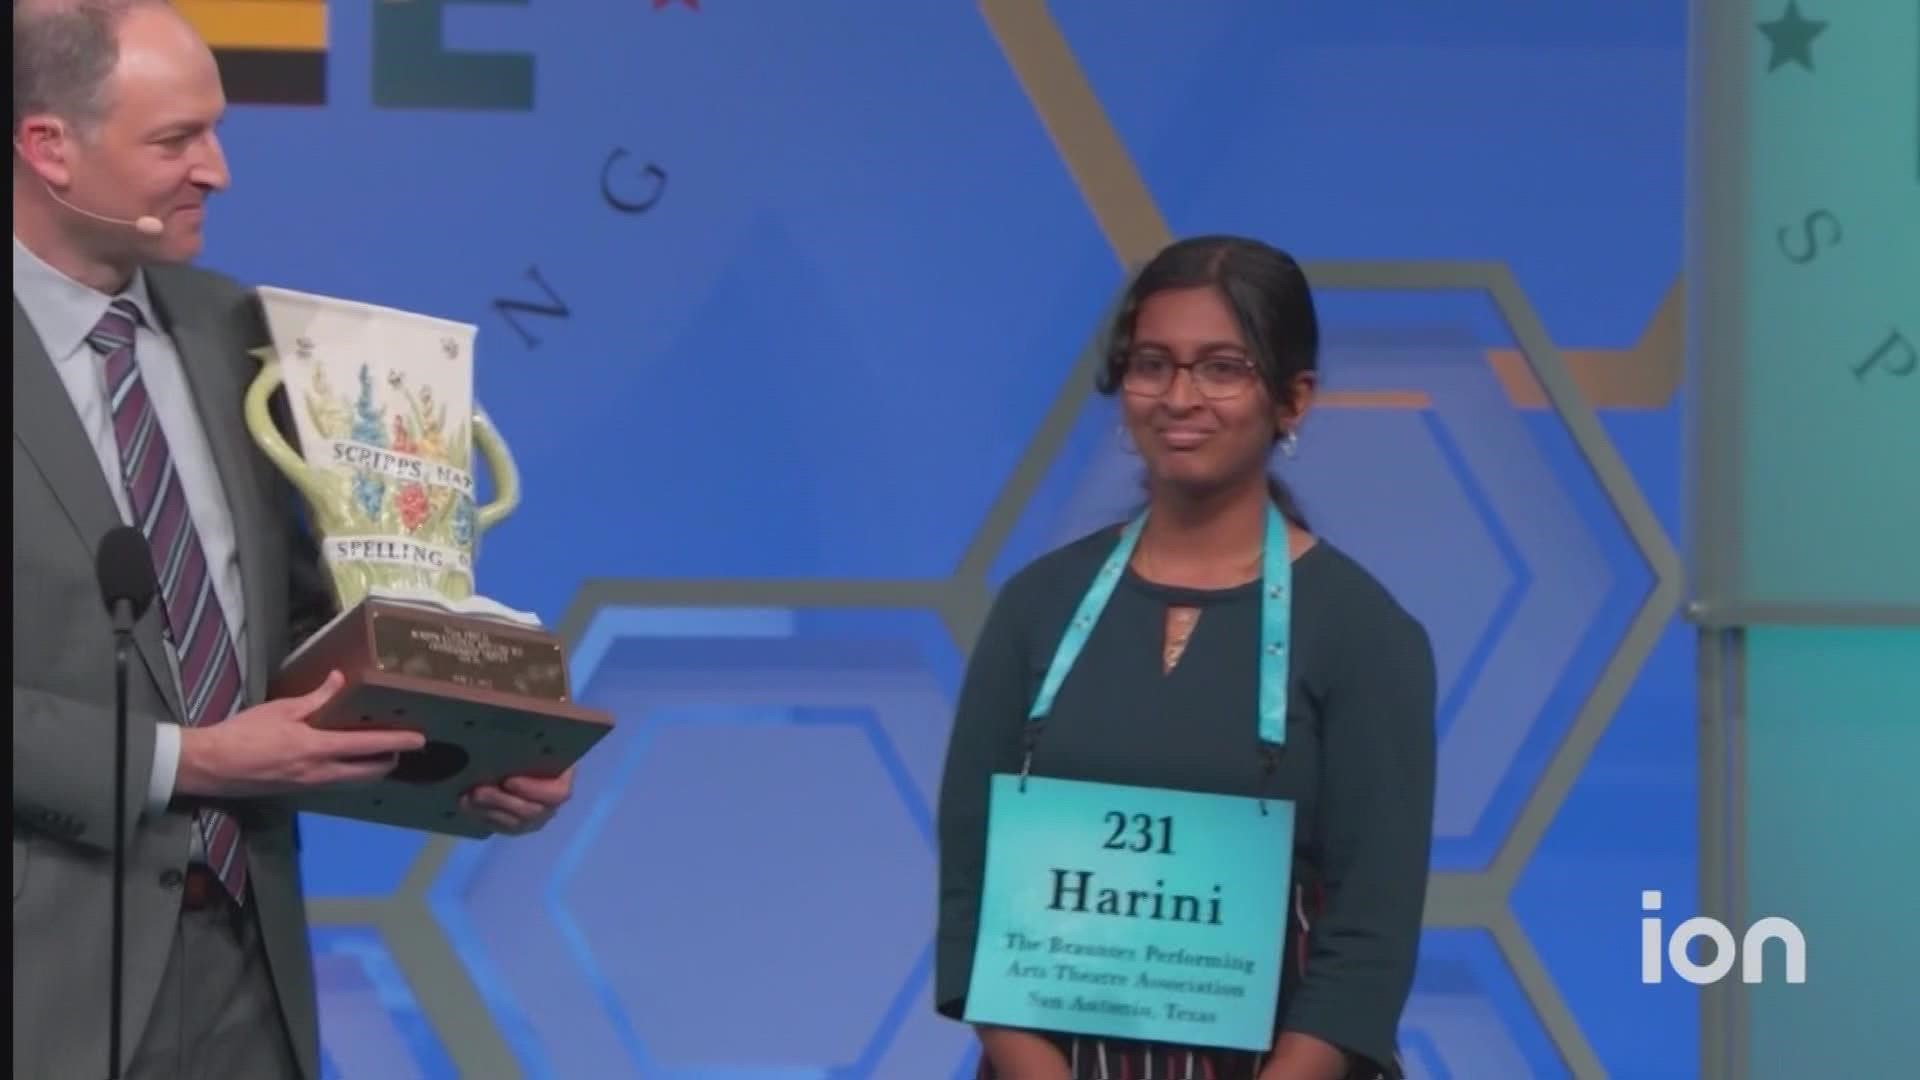 The final two spellers, one of which was from San Antonio, got four words wrong during their grueling showdown before it went to a 90-second spell-off.